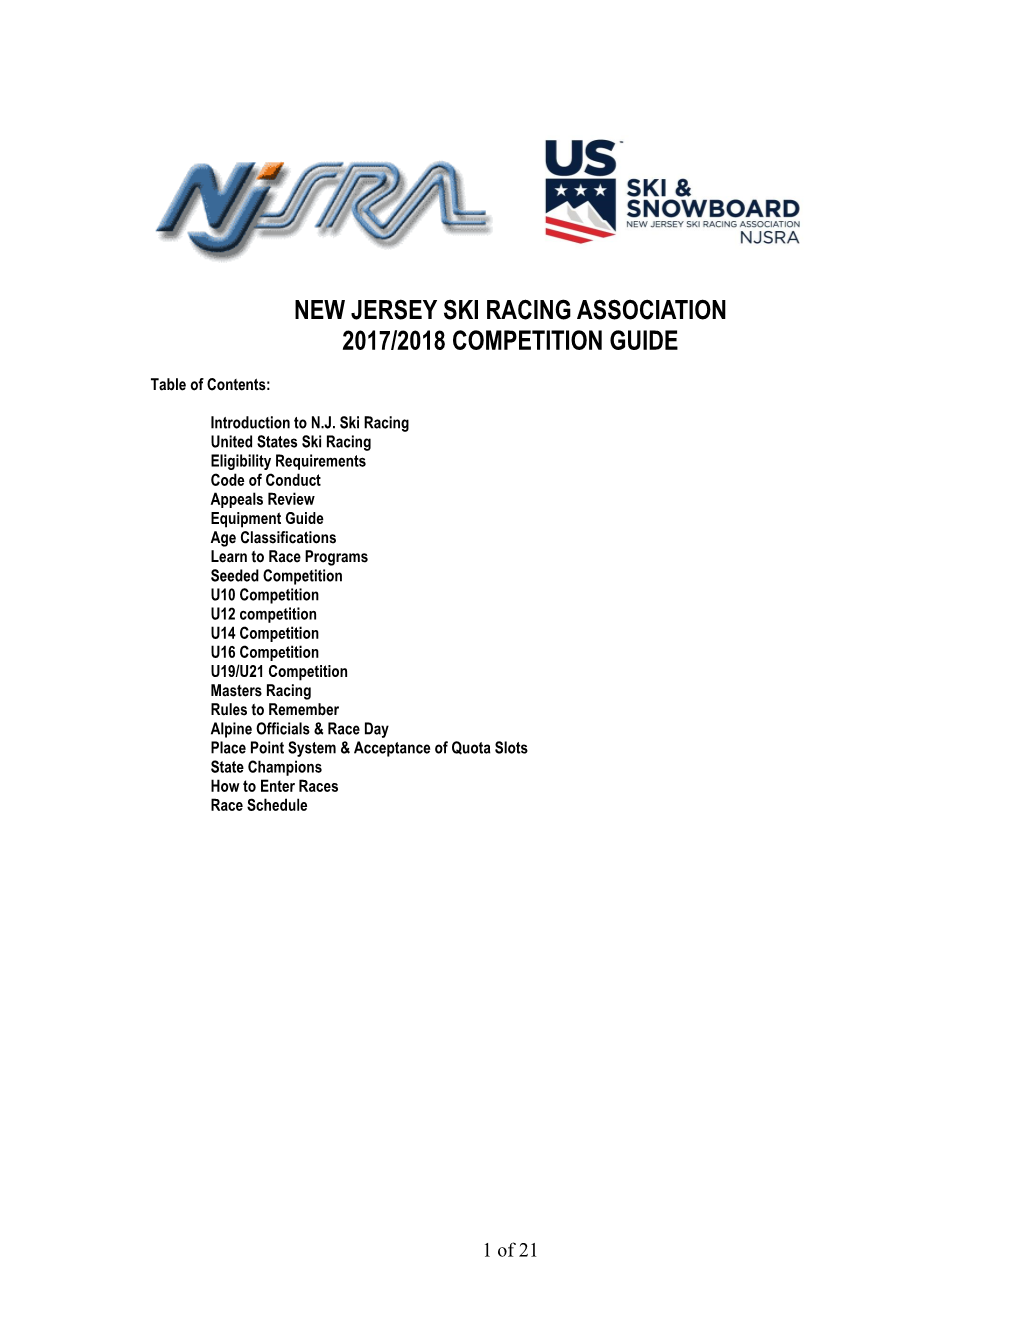 New Jersey Ski Racing Association 2017/2018 Competition Guide